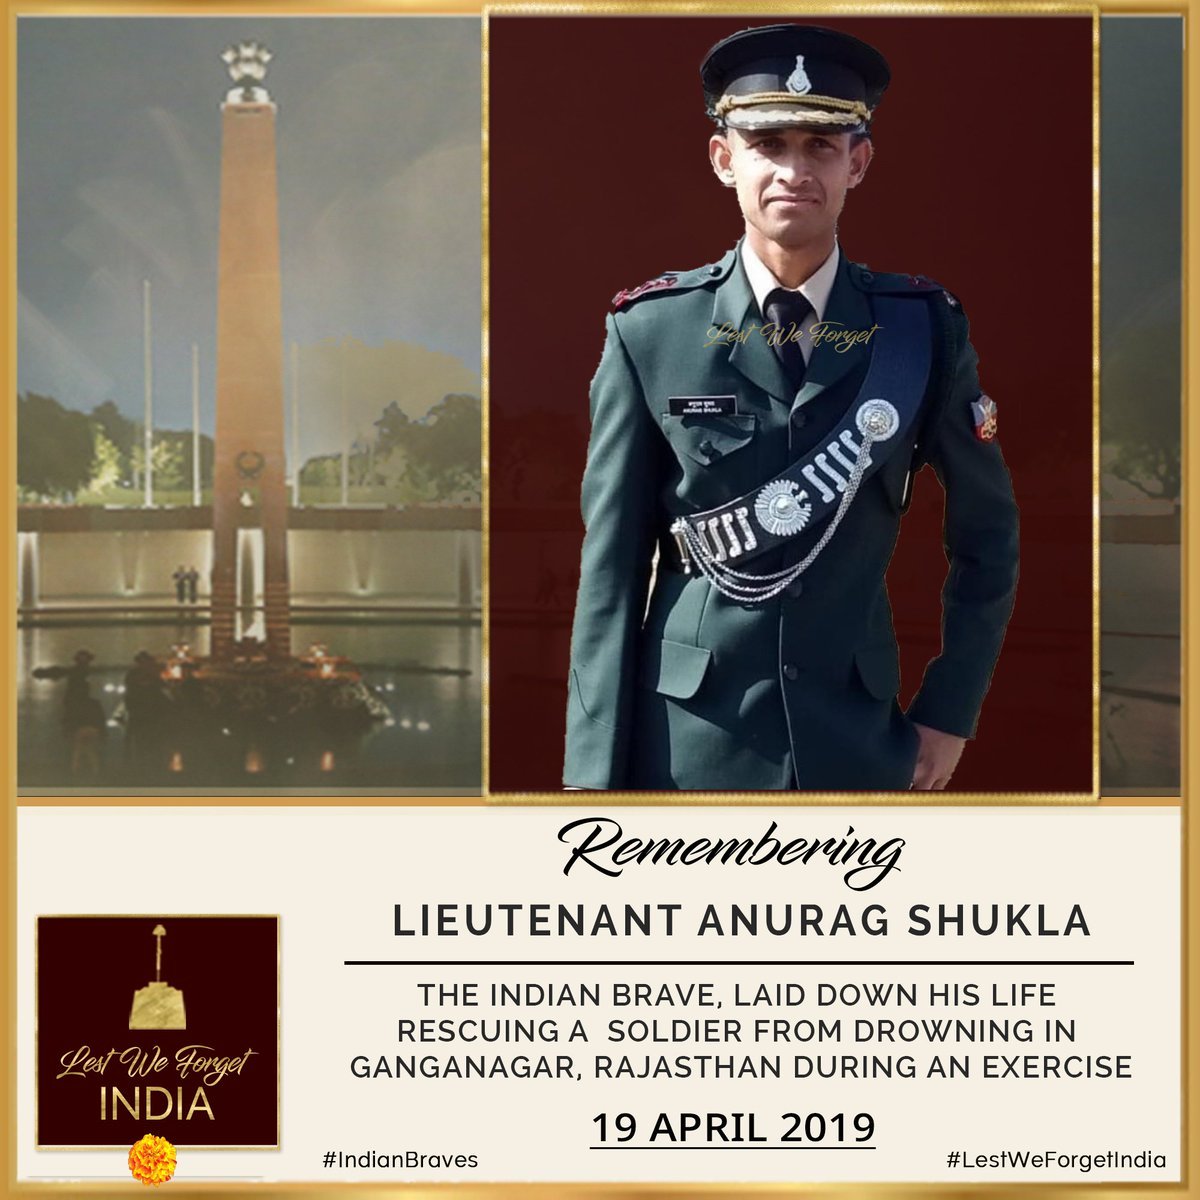 #LestWeForgetIndia🇮🇳 Lt Anurag Shukla, 10 JAK RIF, lost his life in the line of duty- saving a drowning soldier during an op exercise in Rajasthan #OnThisDay 19 April in 2019. Remembering the valiant actions and the supreme sacrifice by the young #IndianBrave